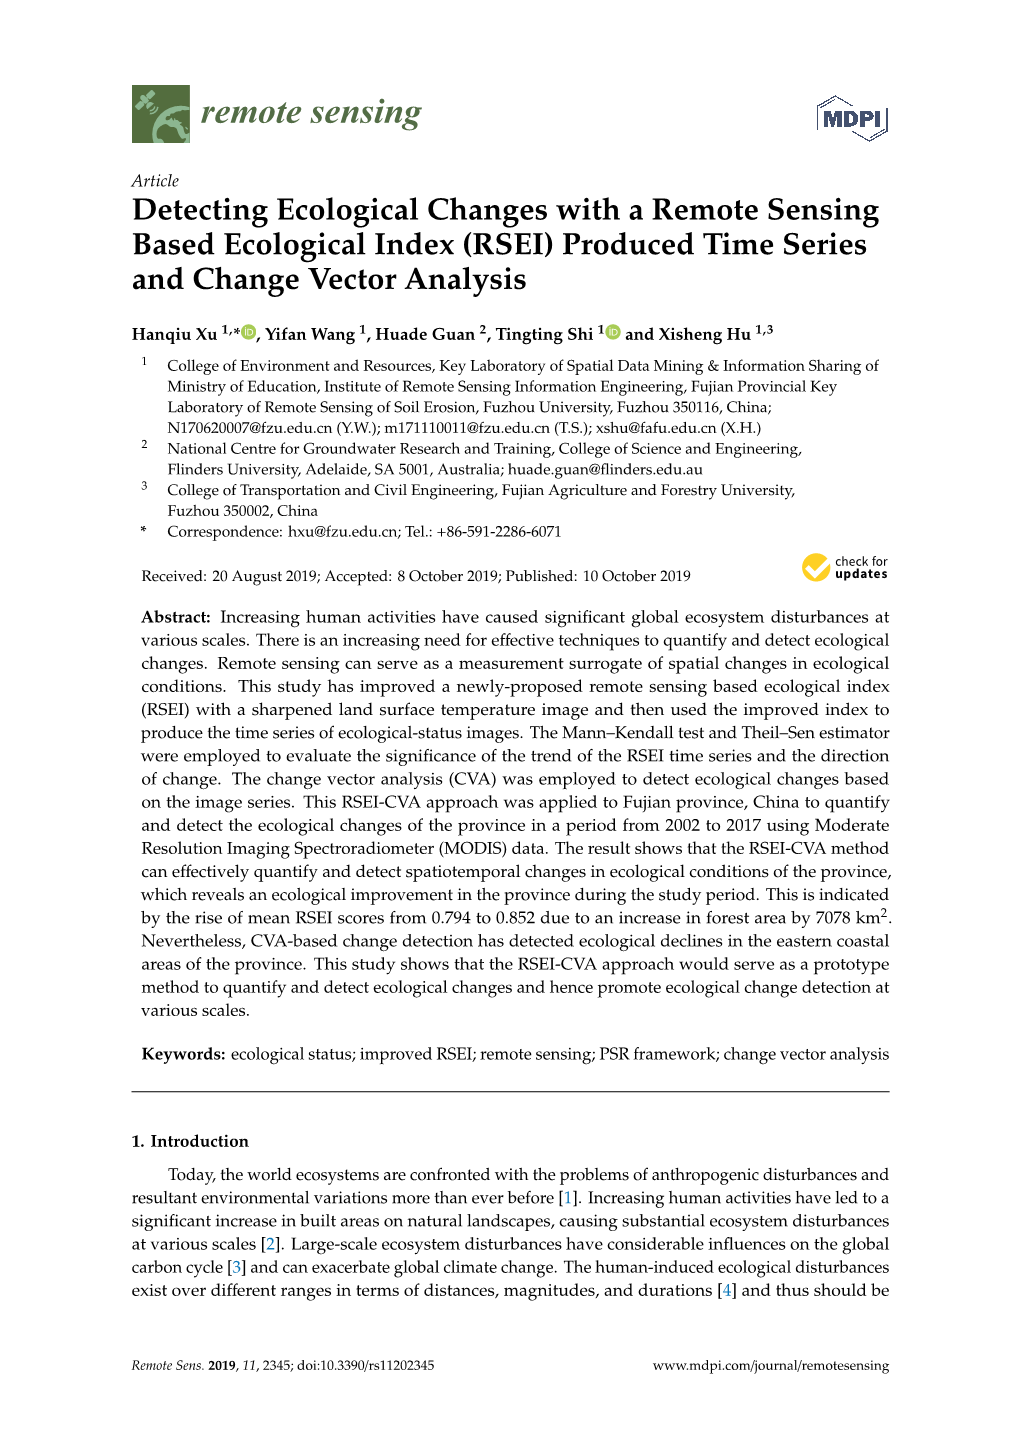 RSEI) Produced Time Series and Change Vector Analysis